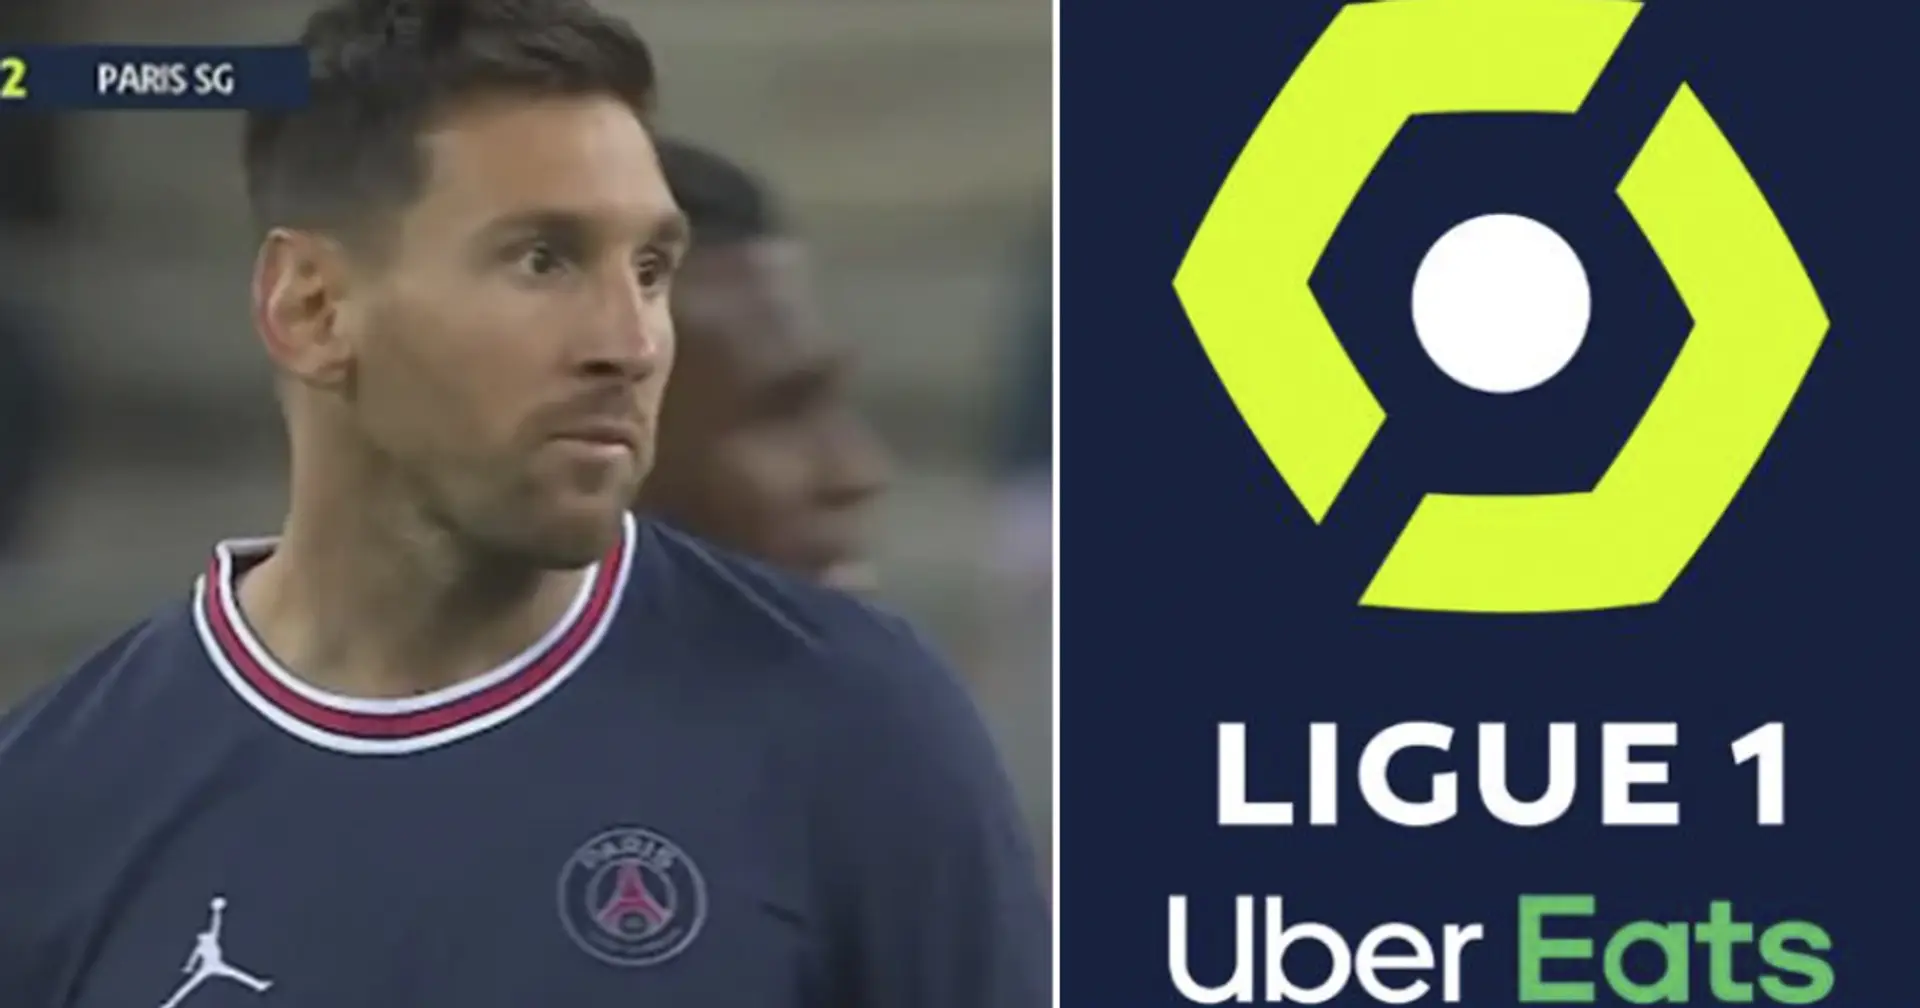 0 goals, 0 assists: Is Messi actually so poor in Ligue 1? Analysed